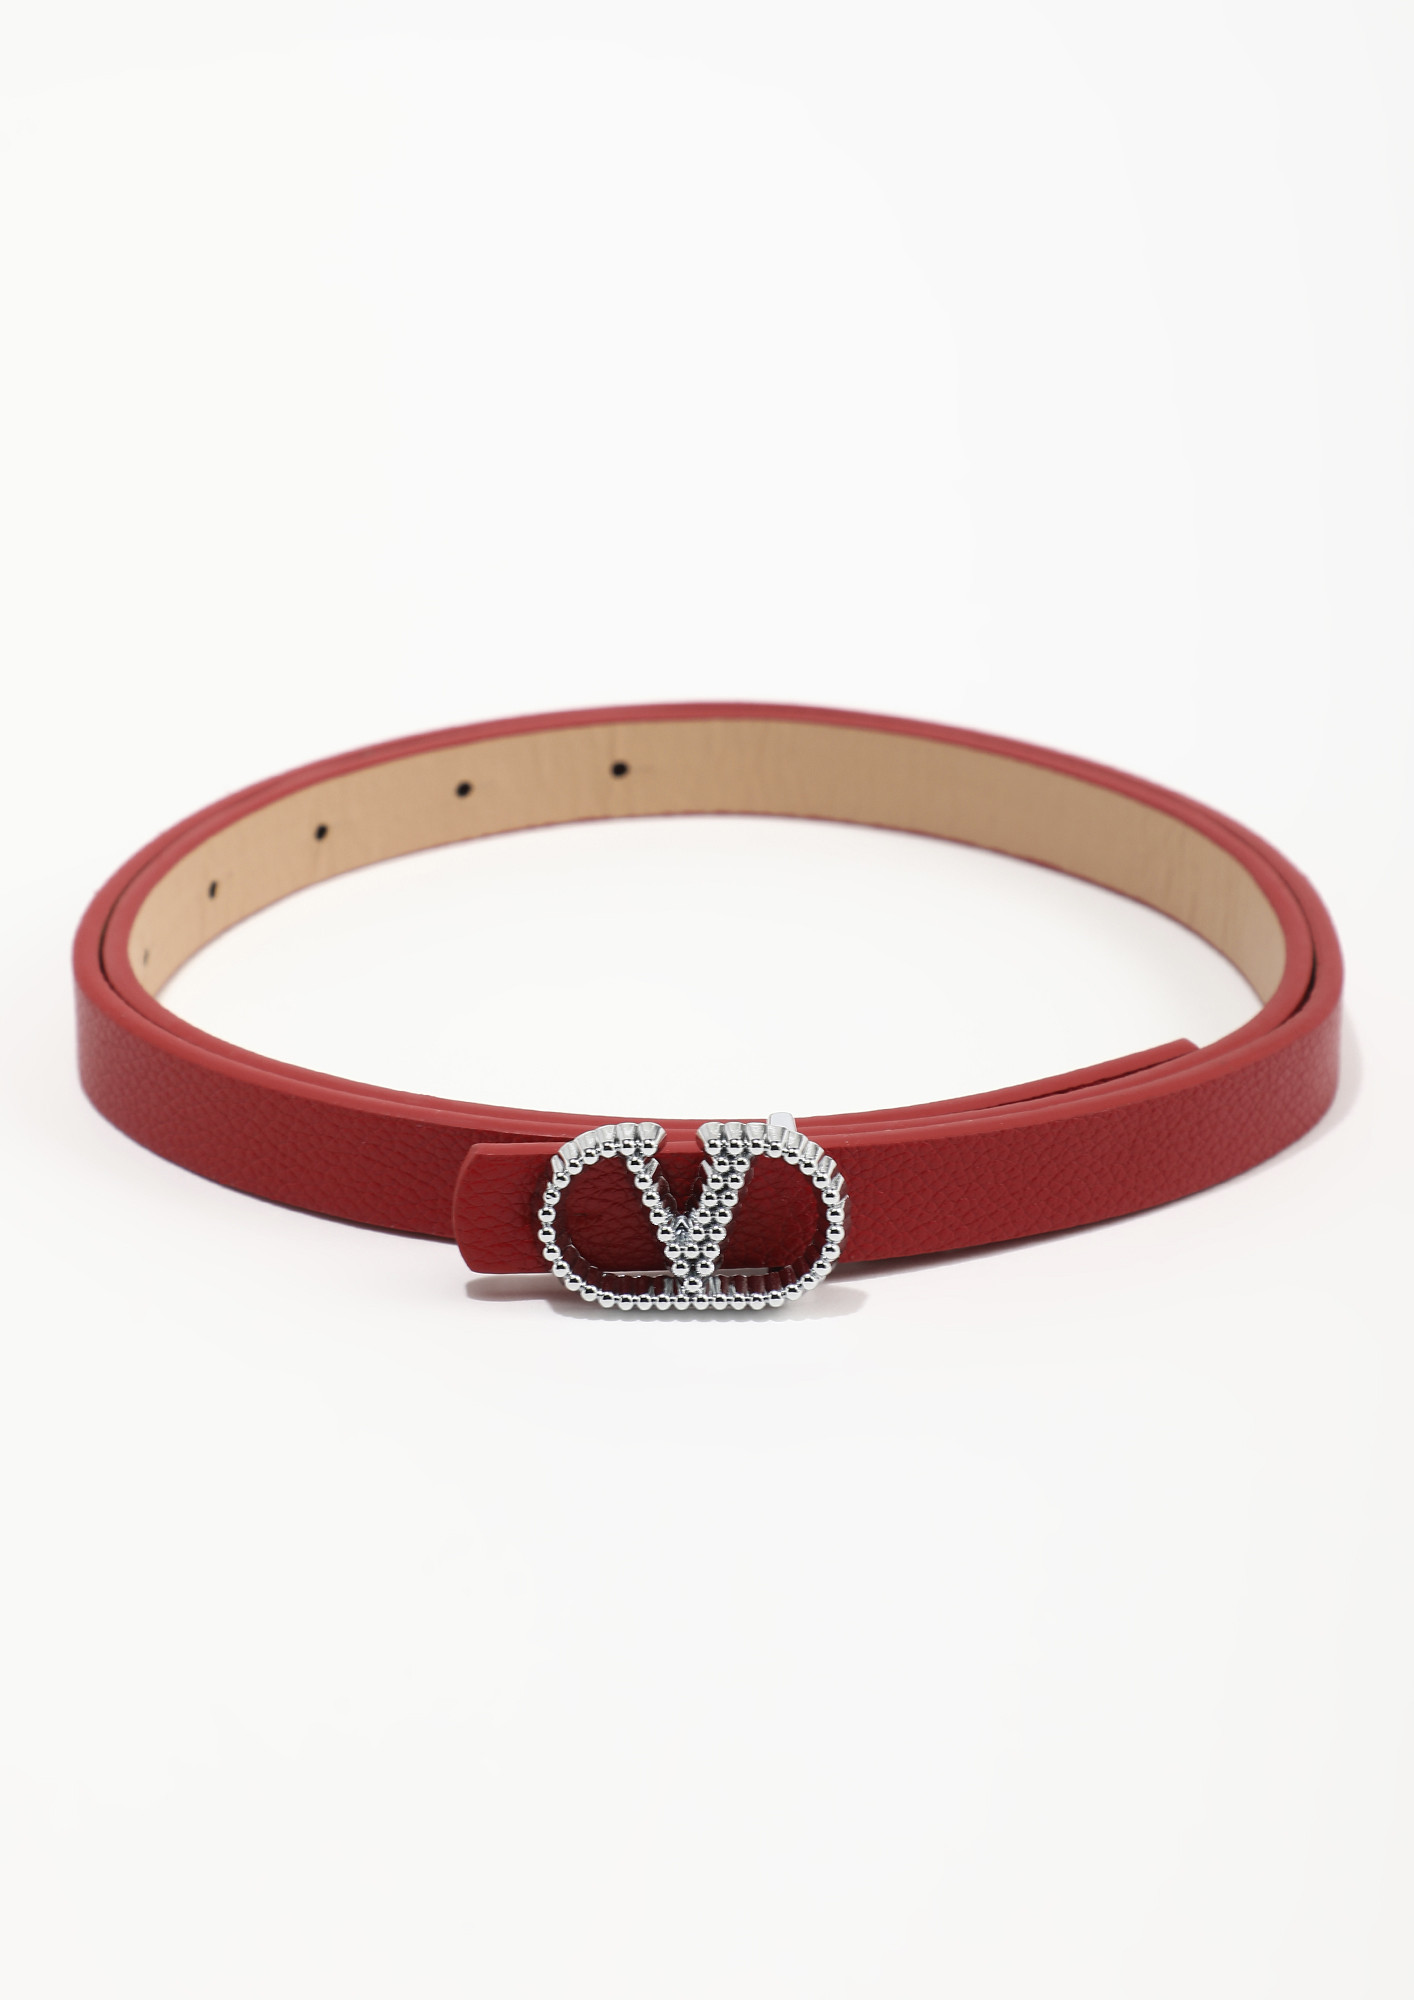 MAKE YOUR OUTFIT SHINE RED BELT